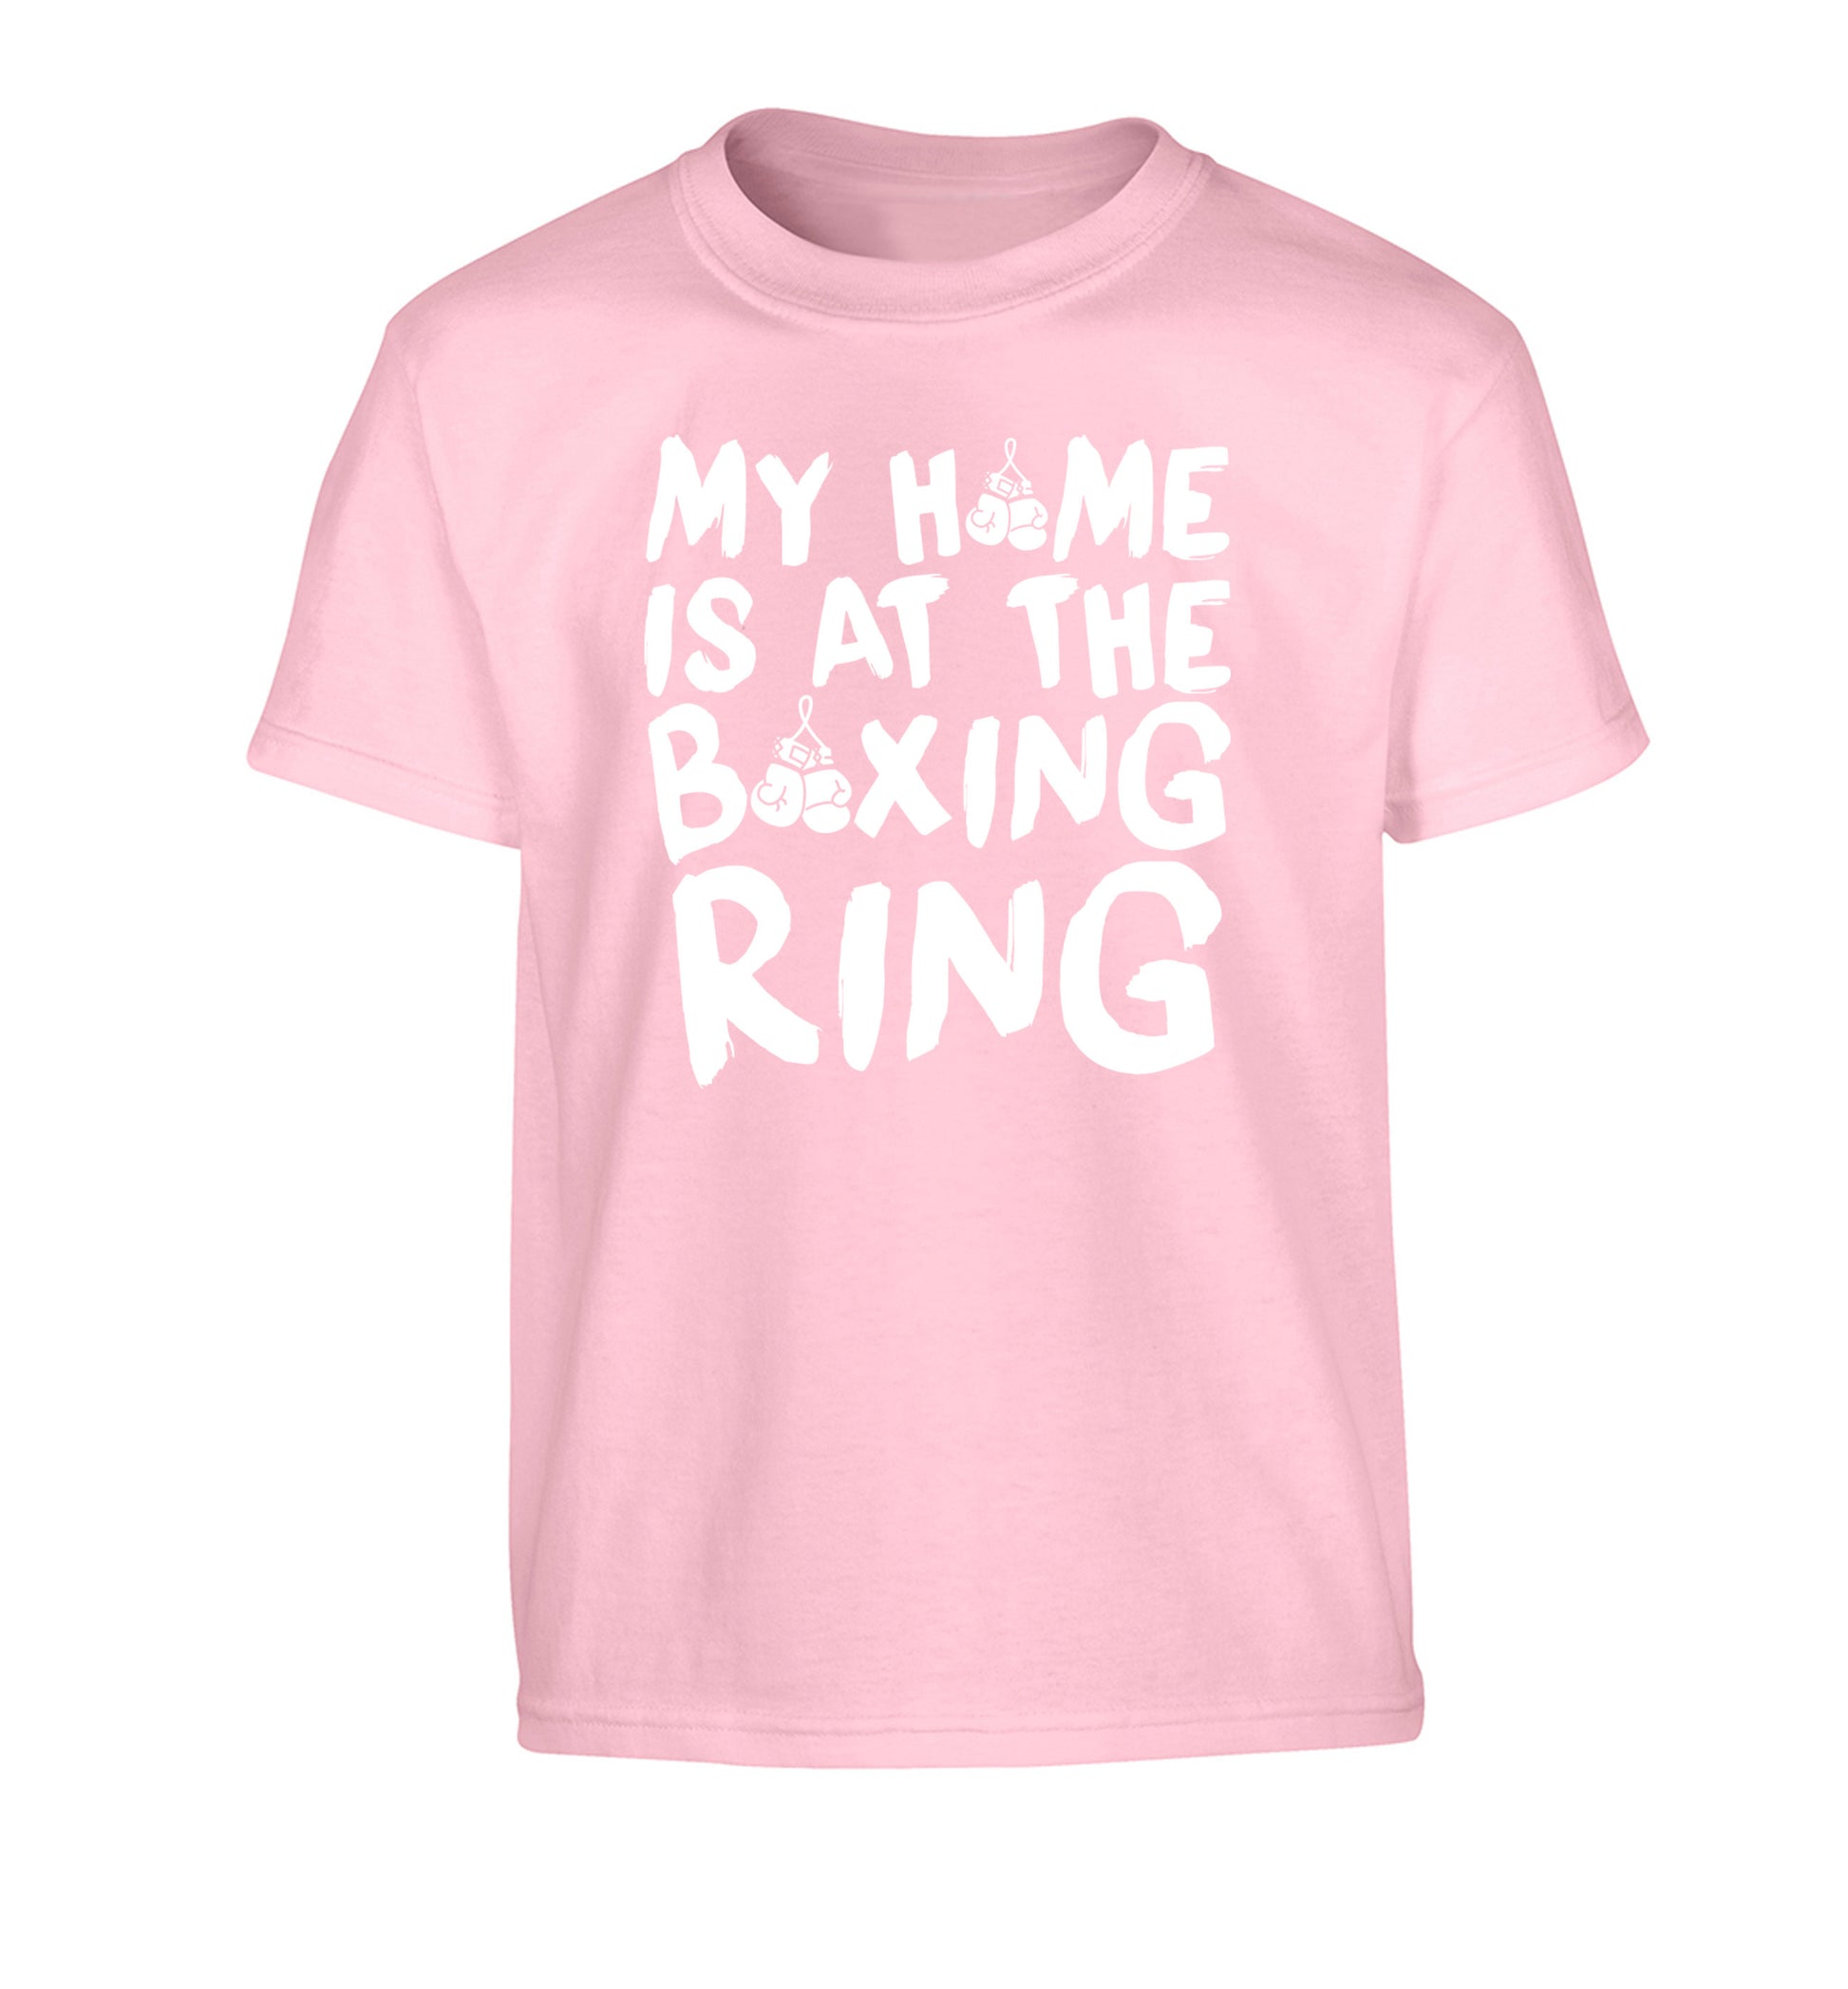 My home is at the boxing ring Children's light pink Tshirt 12-14 Years